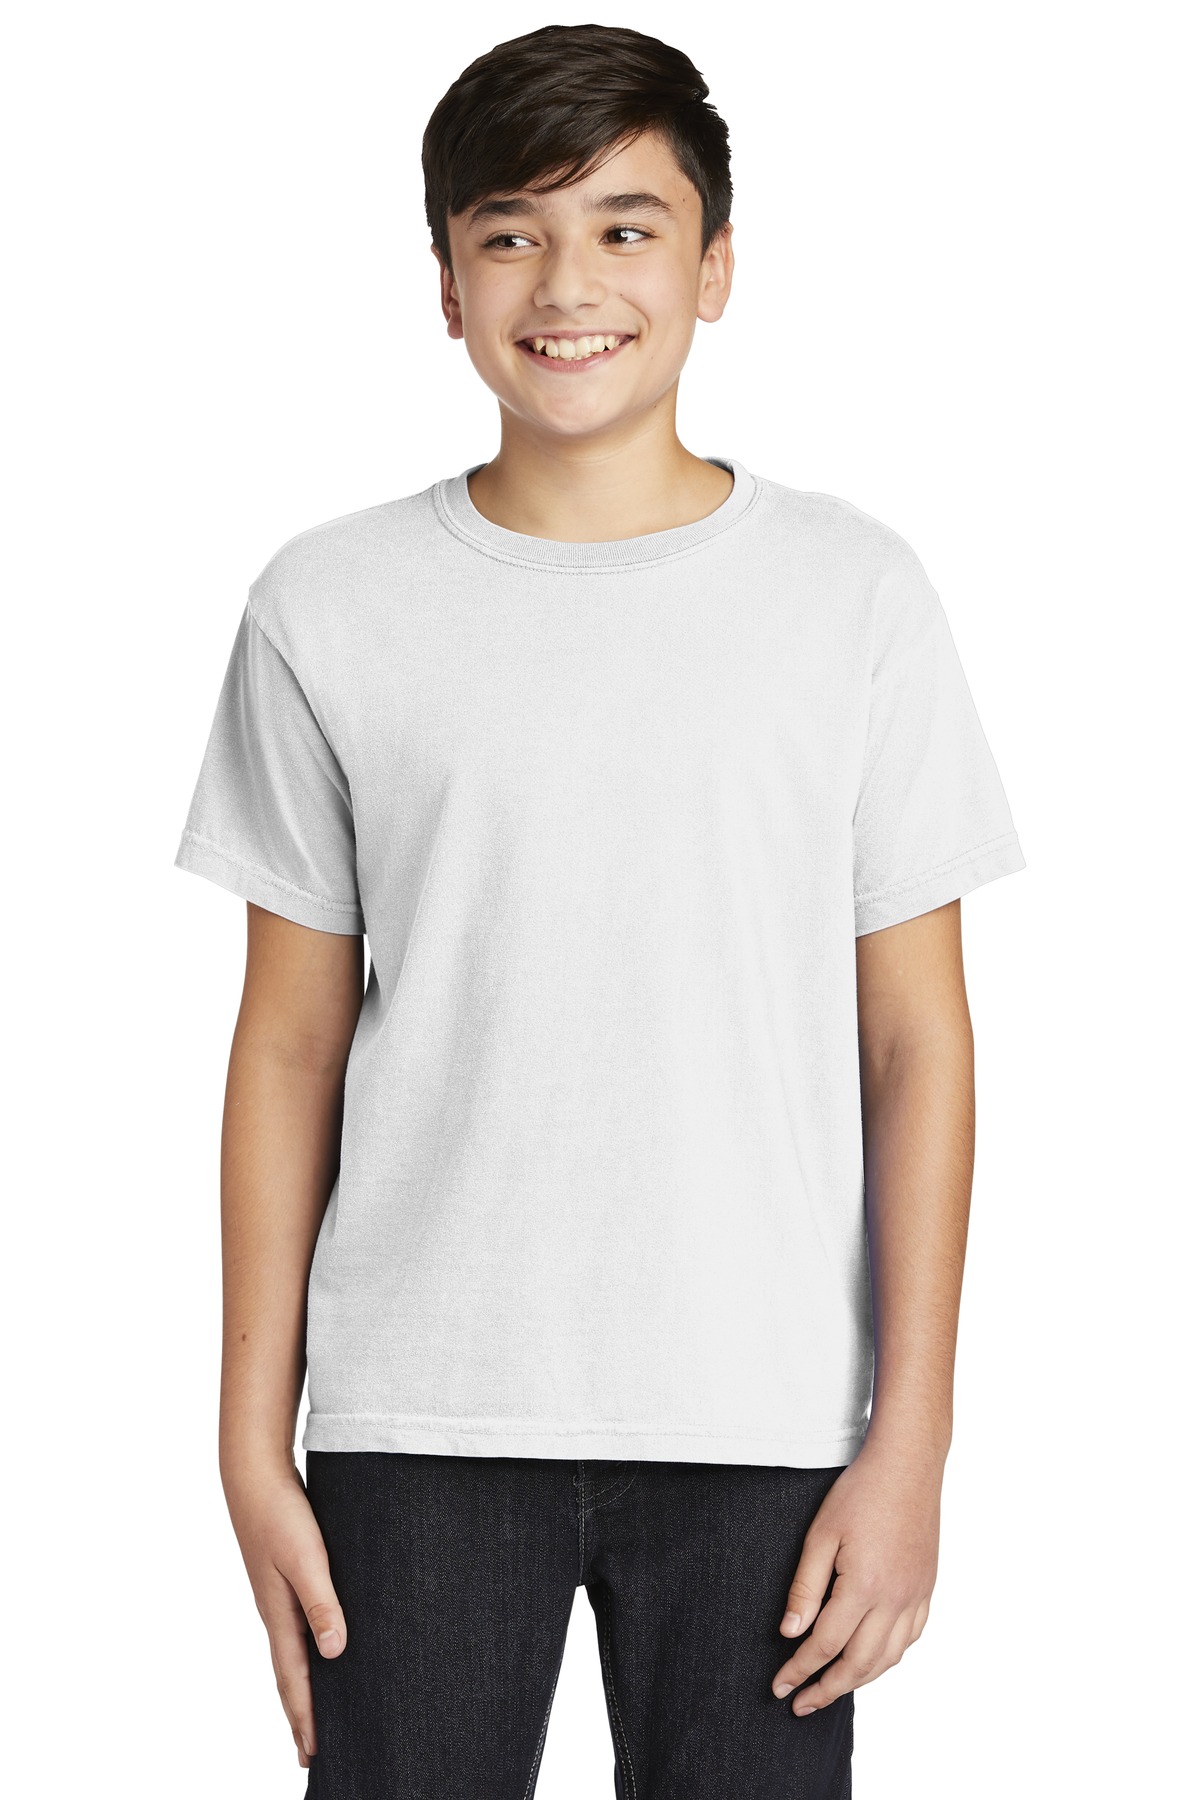 COMFORT COLORS Youth Midweight Ring Spun Tee. 9018